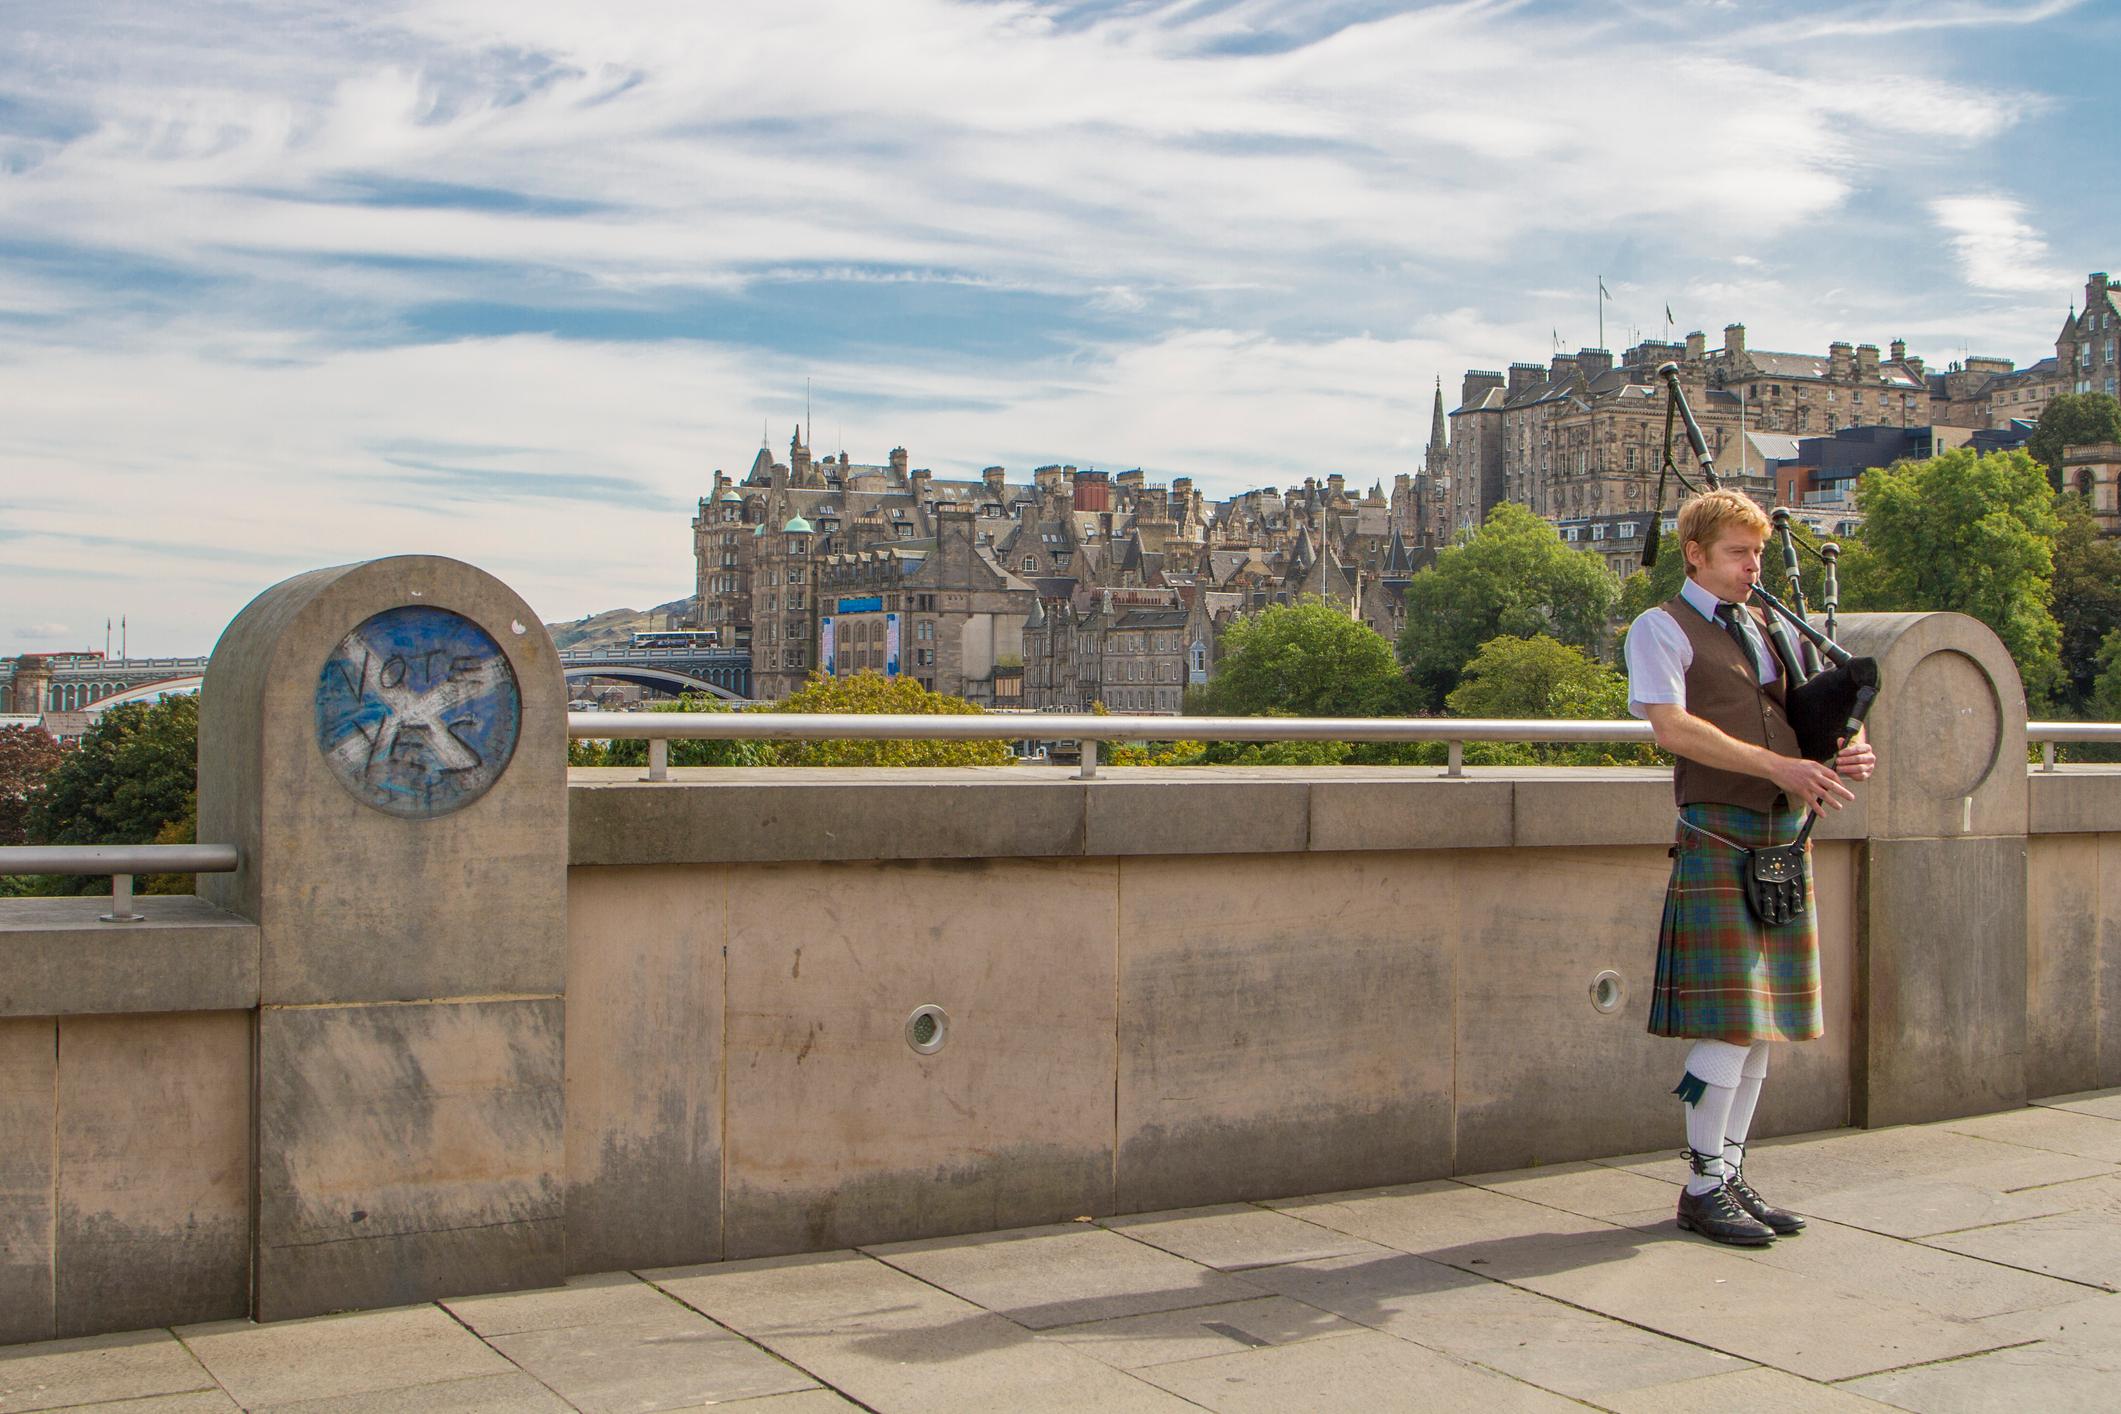 Scottish man in traditional costume playing bagpipes with a graffiti painted 'Vote Yes' sign on wall next to him.